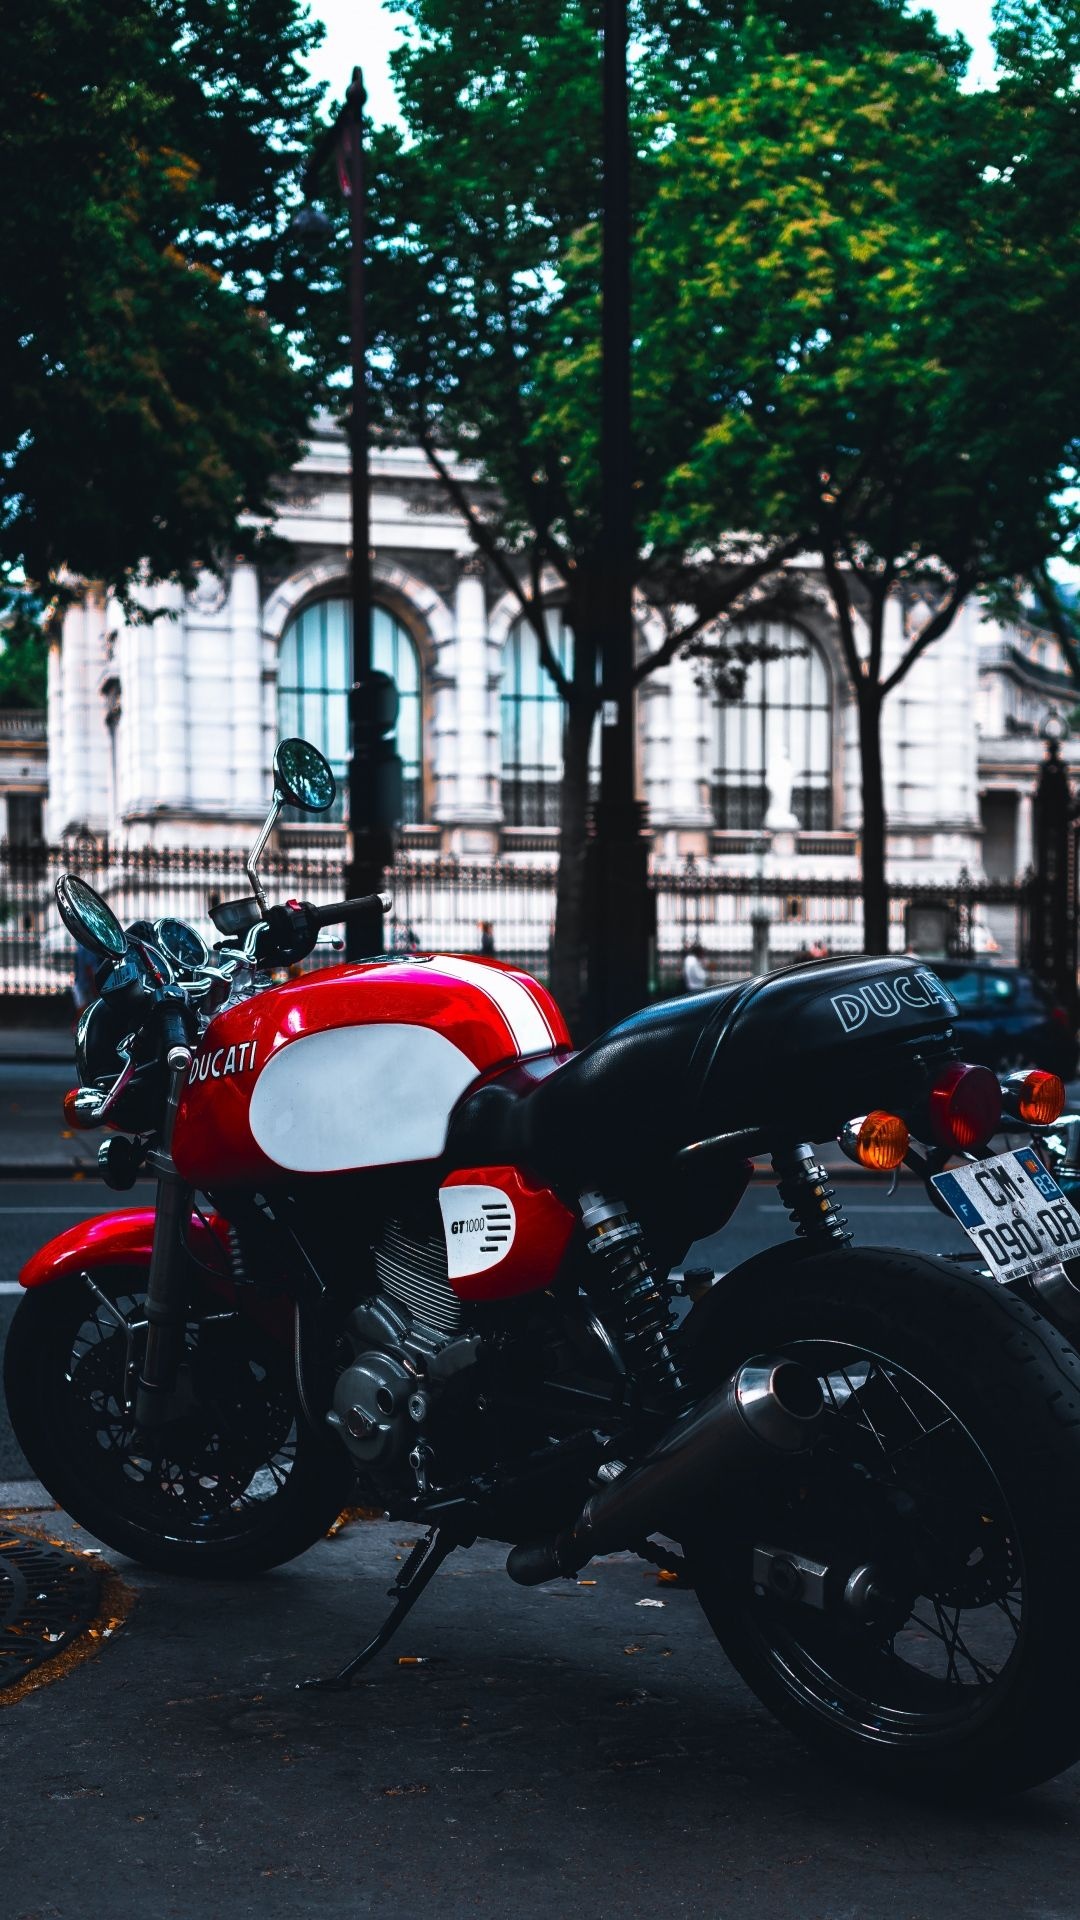 Street Bike, Motorcycle wallpapers, Rider's dream, Freedom of the open road, 1080x1920 Full HD Phone